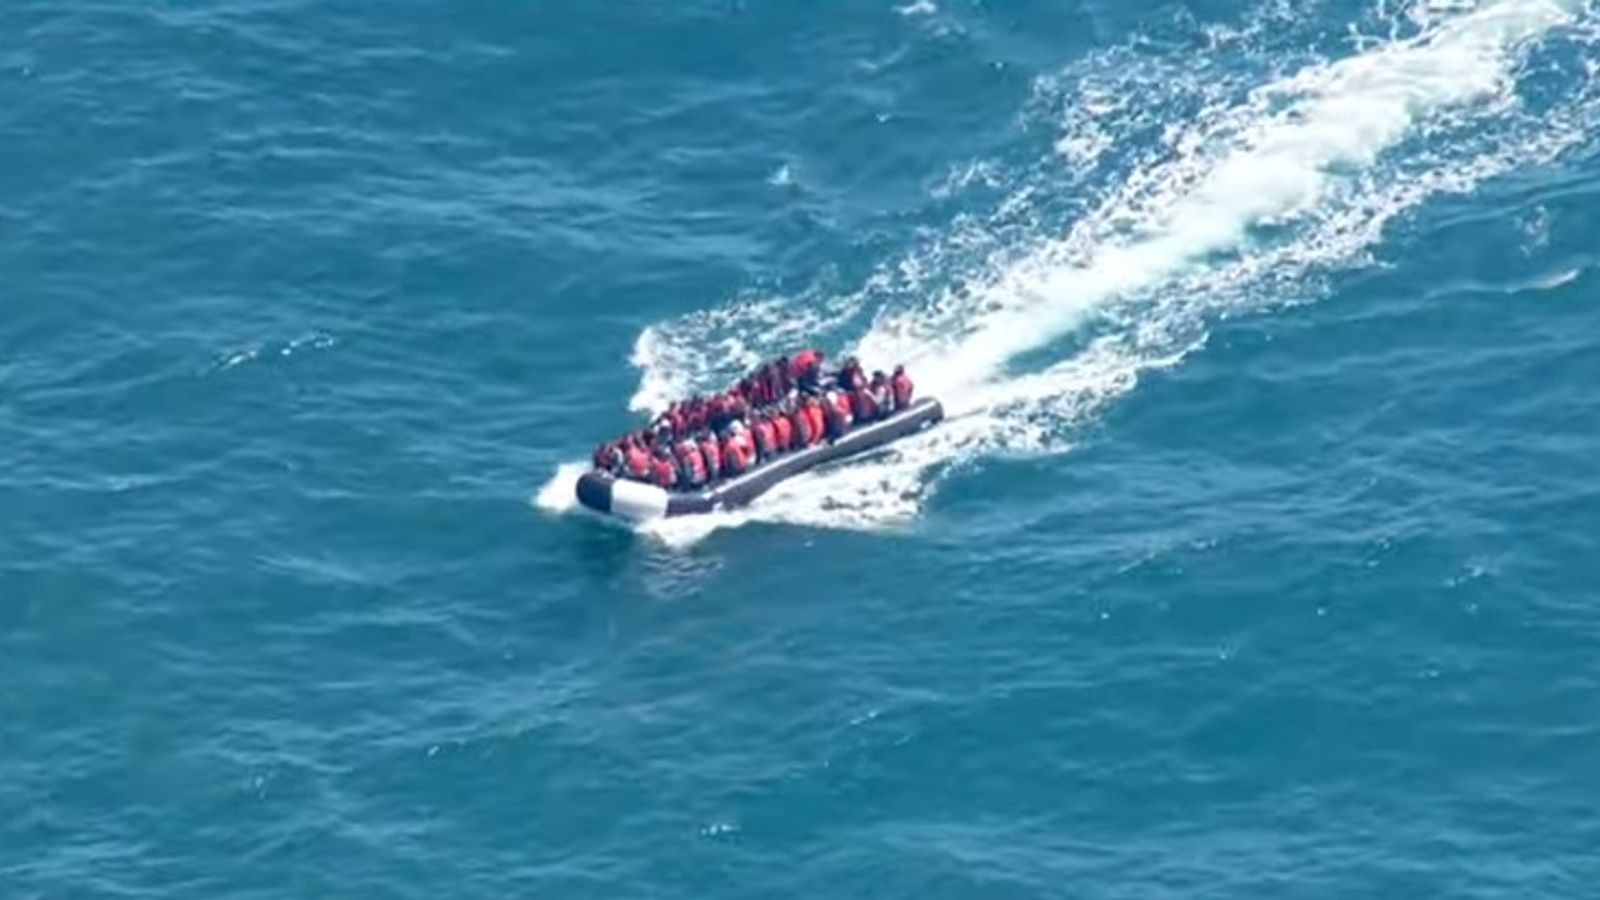 More than 10,000 migrants arrive in UK by crossing Channel in small boats this year